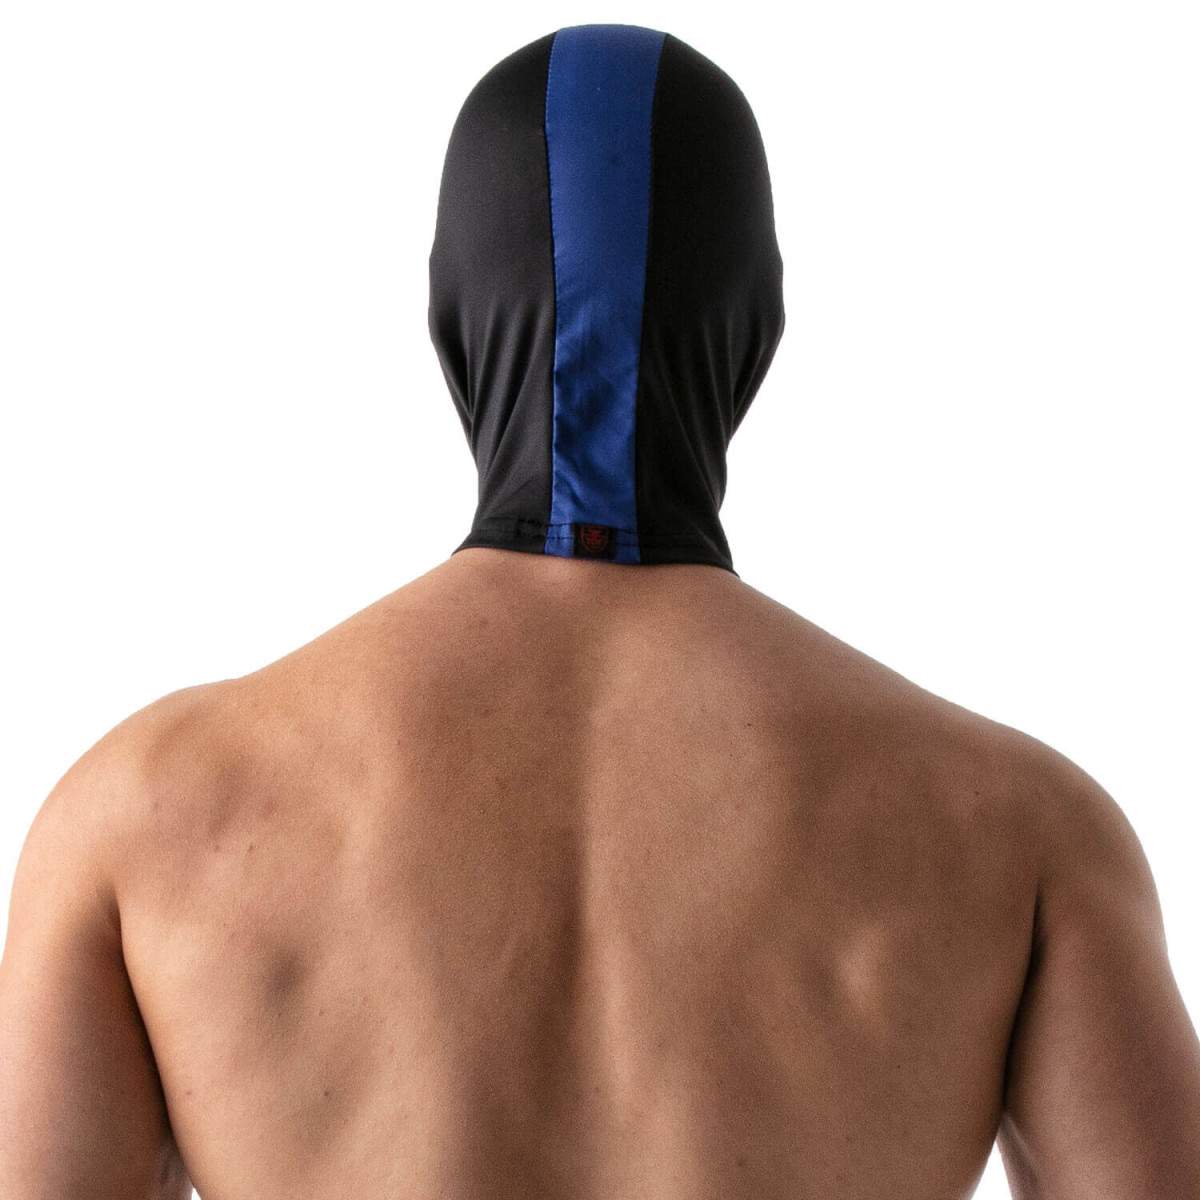 TOF Naughty hood with open mouth, black and blue